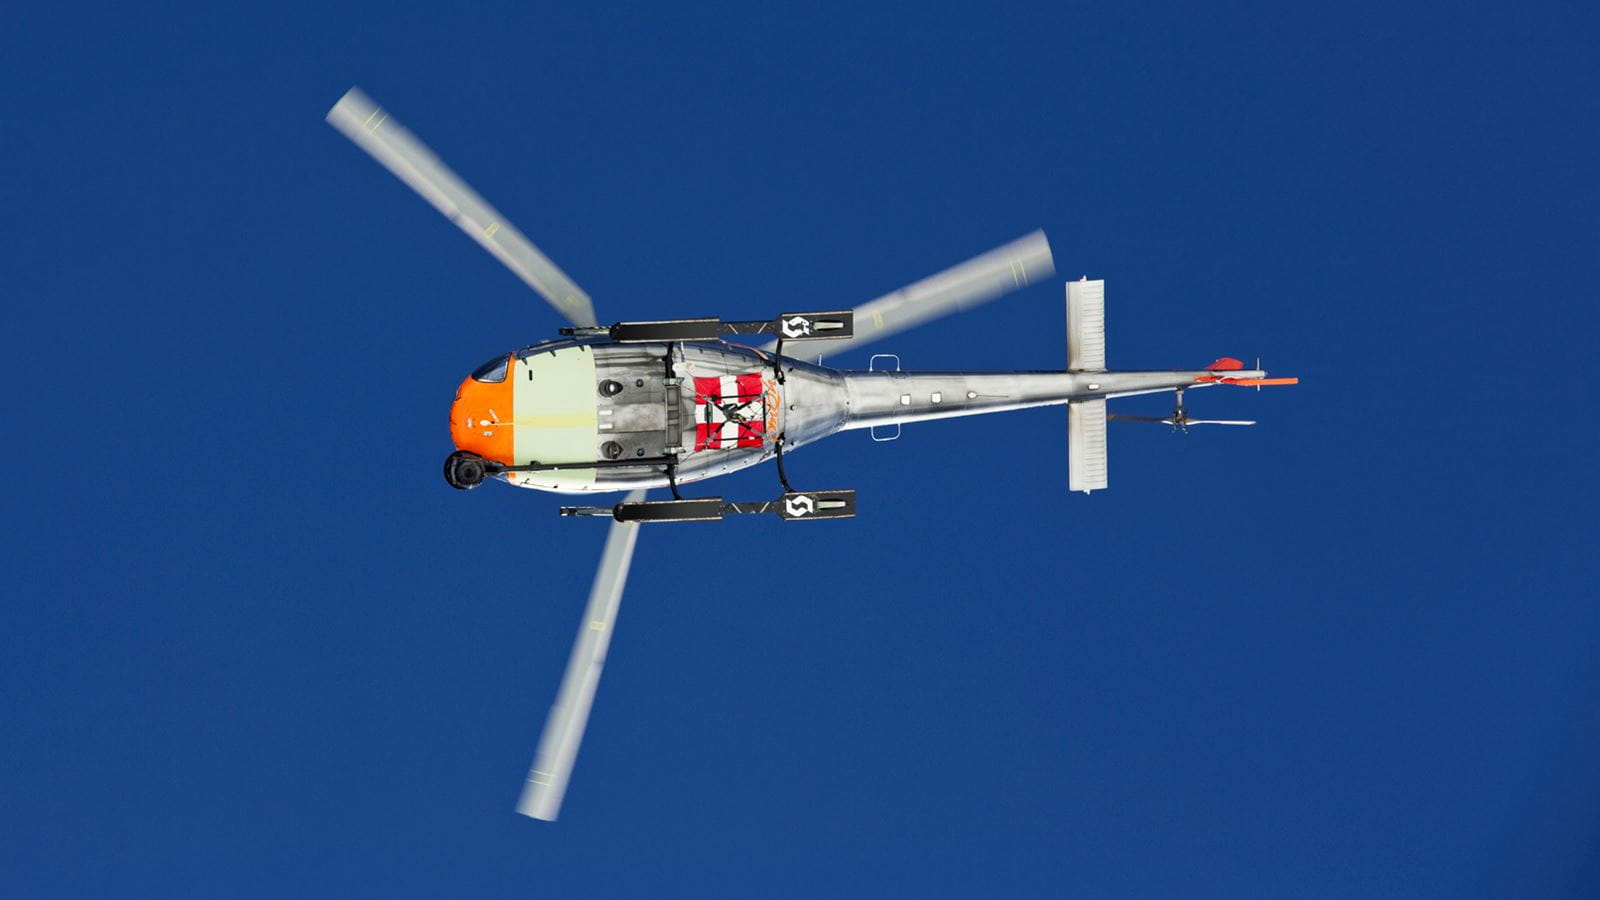 Airbus AS350 helicopter